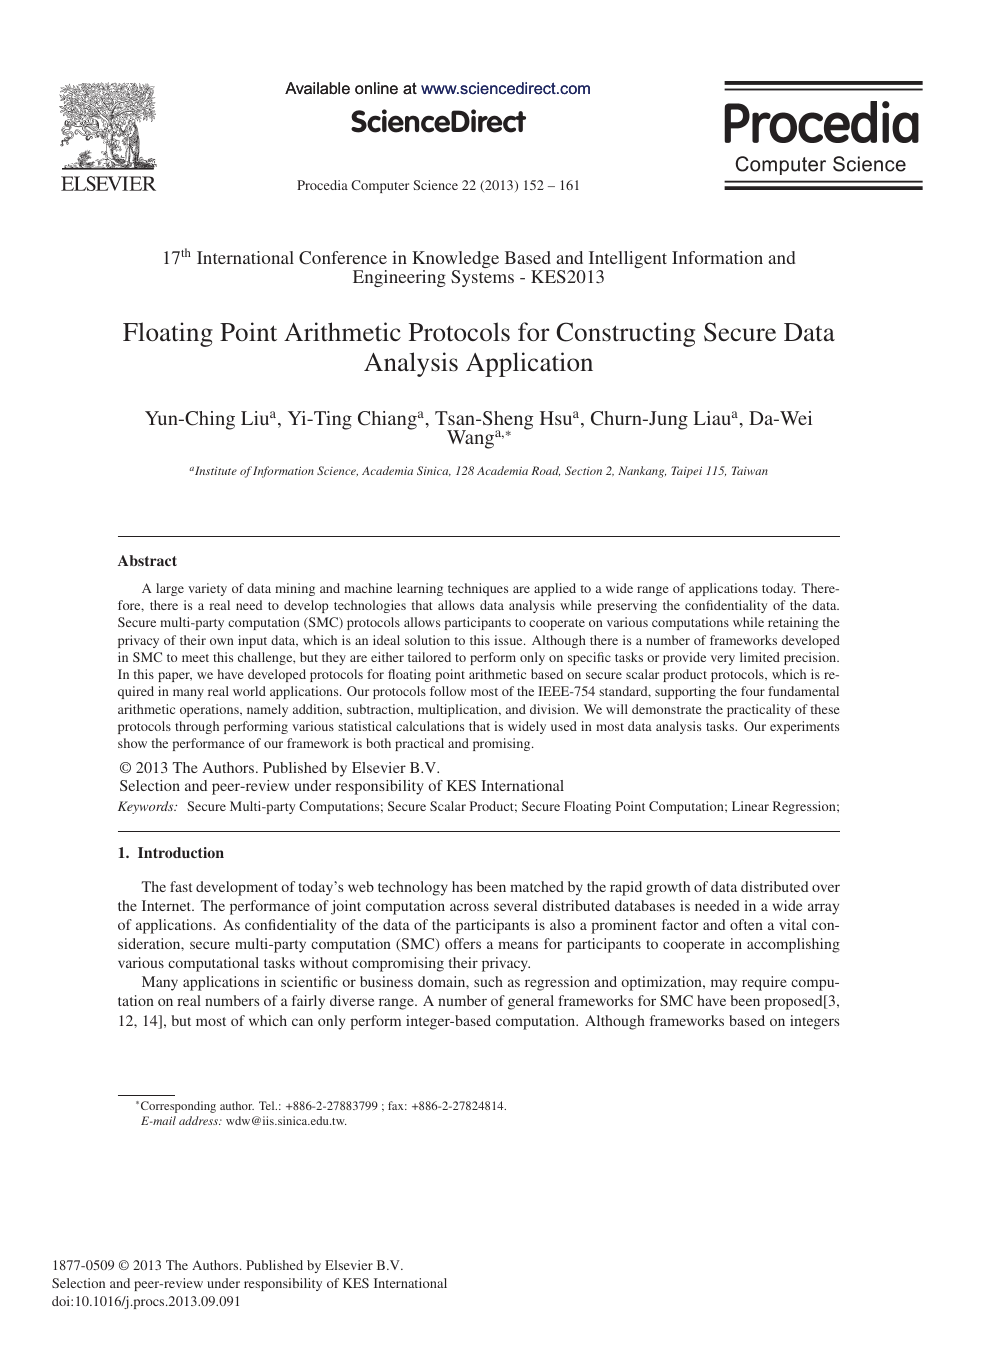 Floating Point Arithmetic Protocols For Constructing Secure Data Analysis Application Topic Of Research Paper In Computer And Information Sciences Download Scholarly Article Pdf And Read For Free On Cyberleninka Open Science